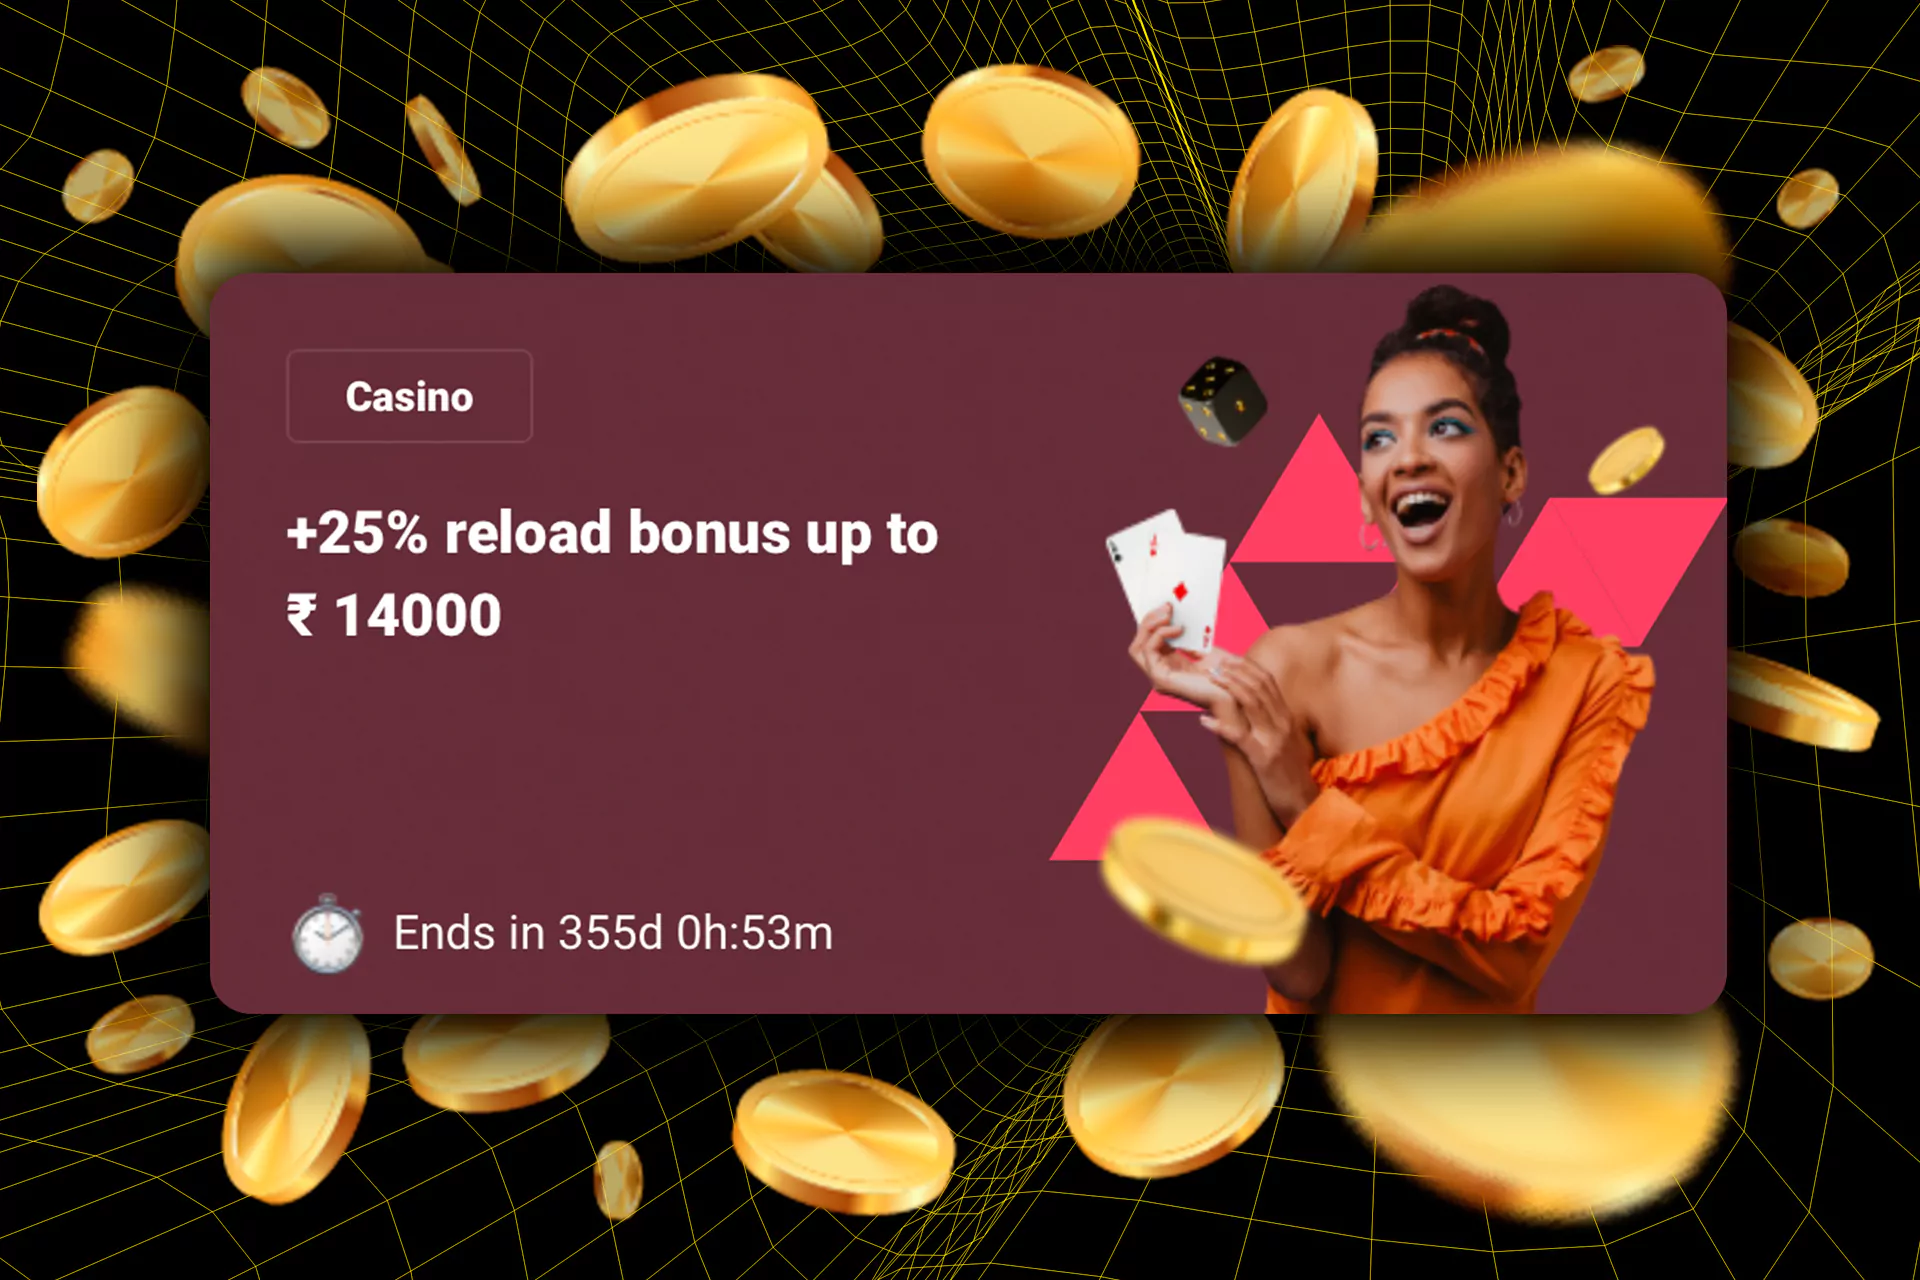 The 25% bonus can be got at a new bettor's second deposit.